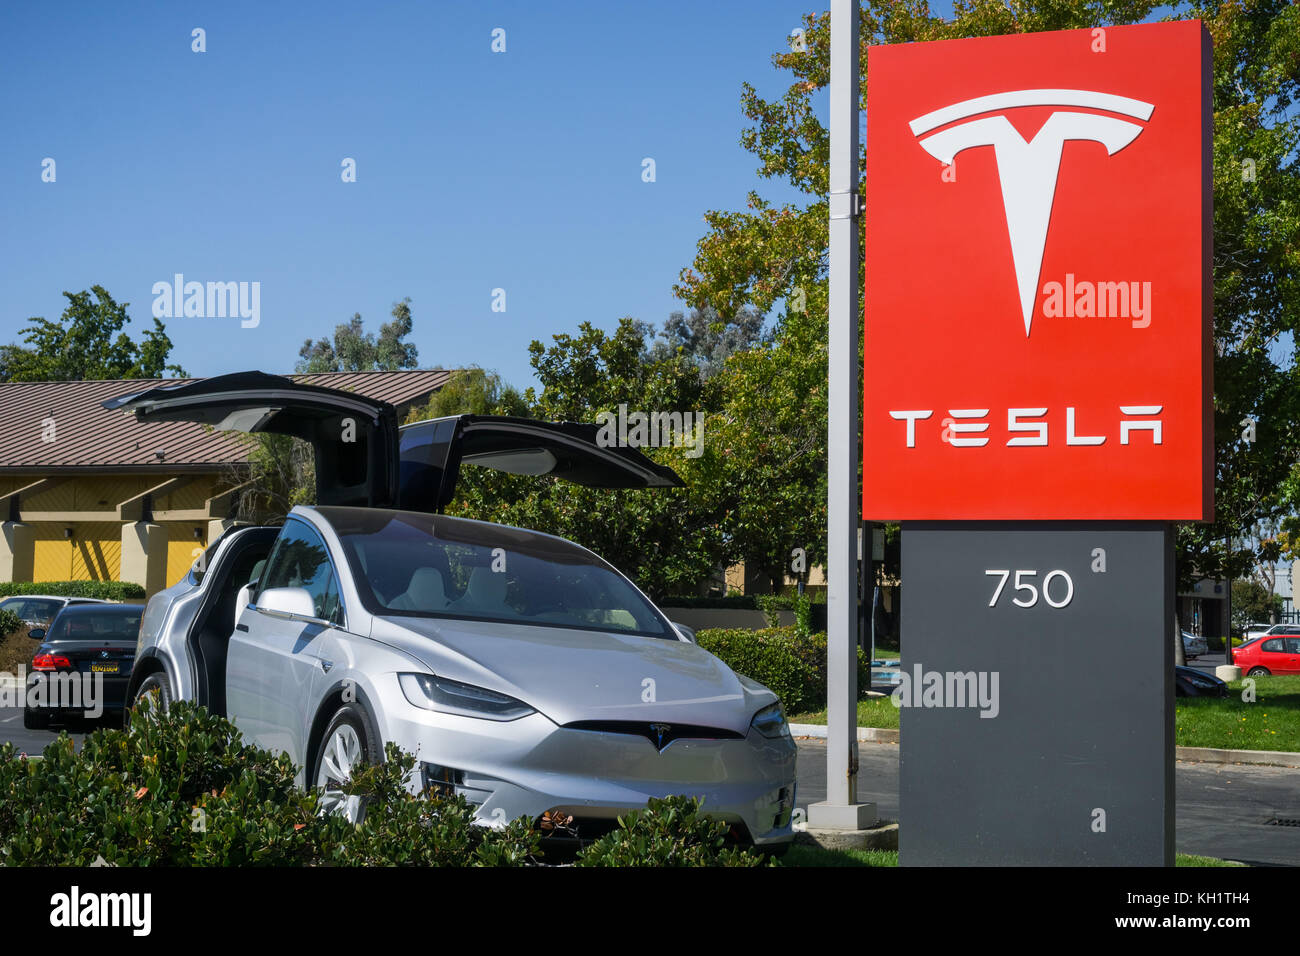 October 3, 2017 Sunnyvale/CA/USA - Tesla logo and car displayed in front of a showroom located in San Francisco bay area Stock Photo